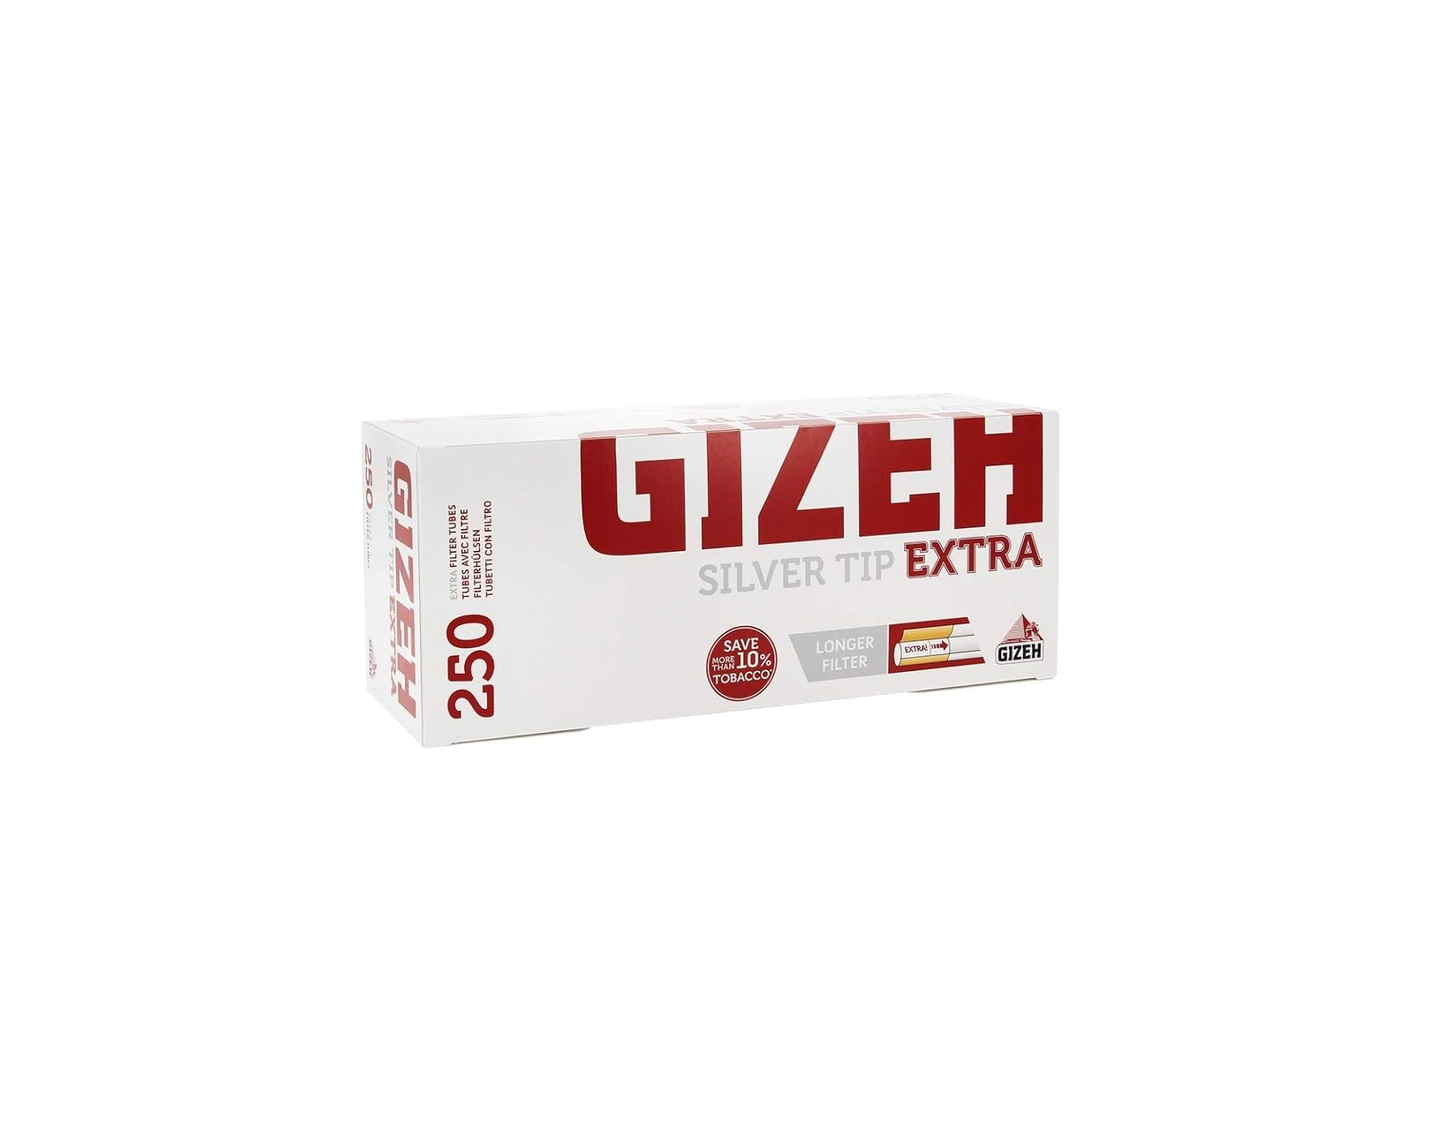 GIZEH SILVER TIP TUBO 250 EXTRA (40)